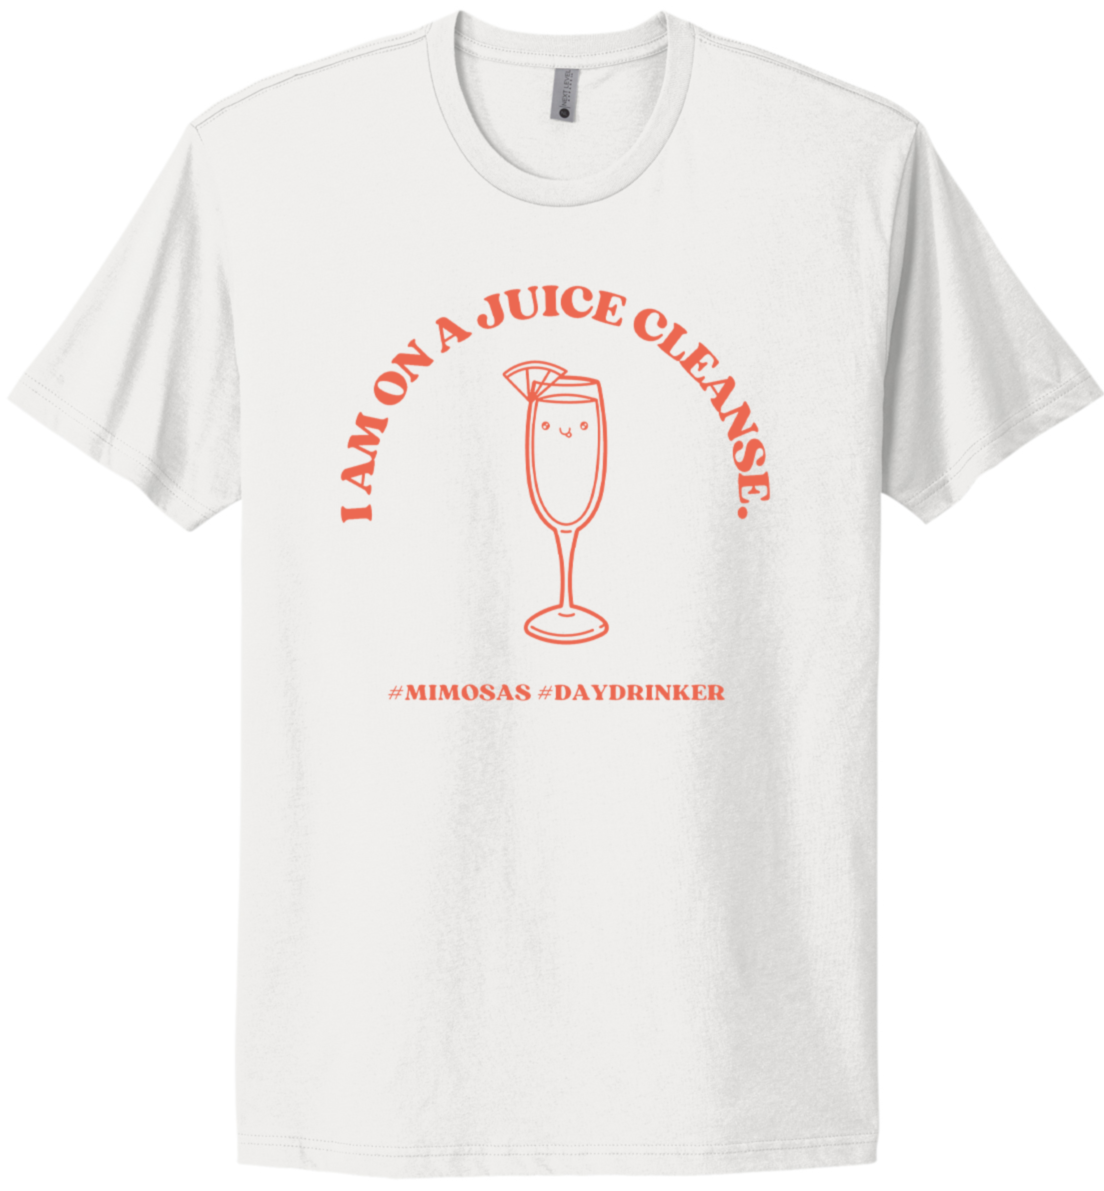 I Am On a Juice Cleanse Tee